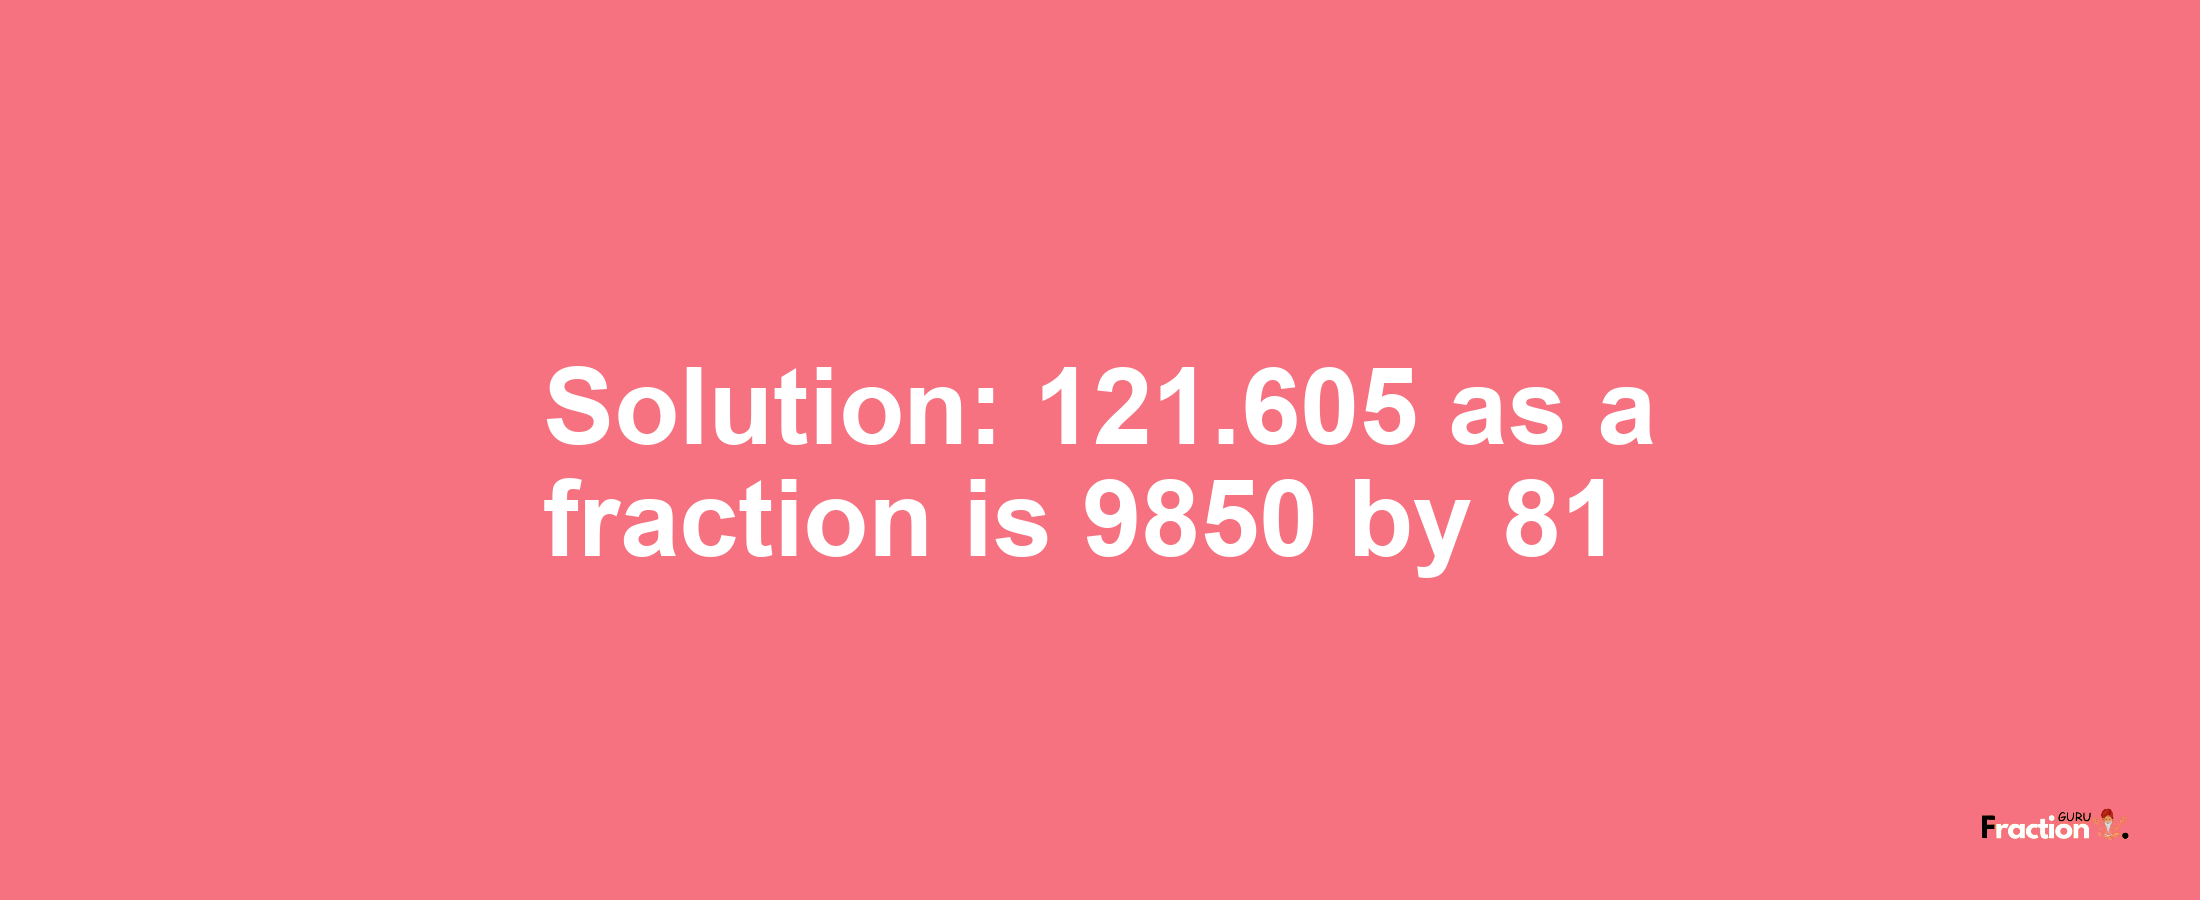 Solution:121.605 as a fraction is 9850/81